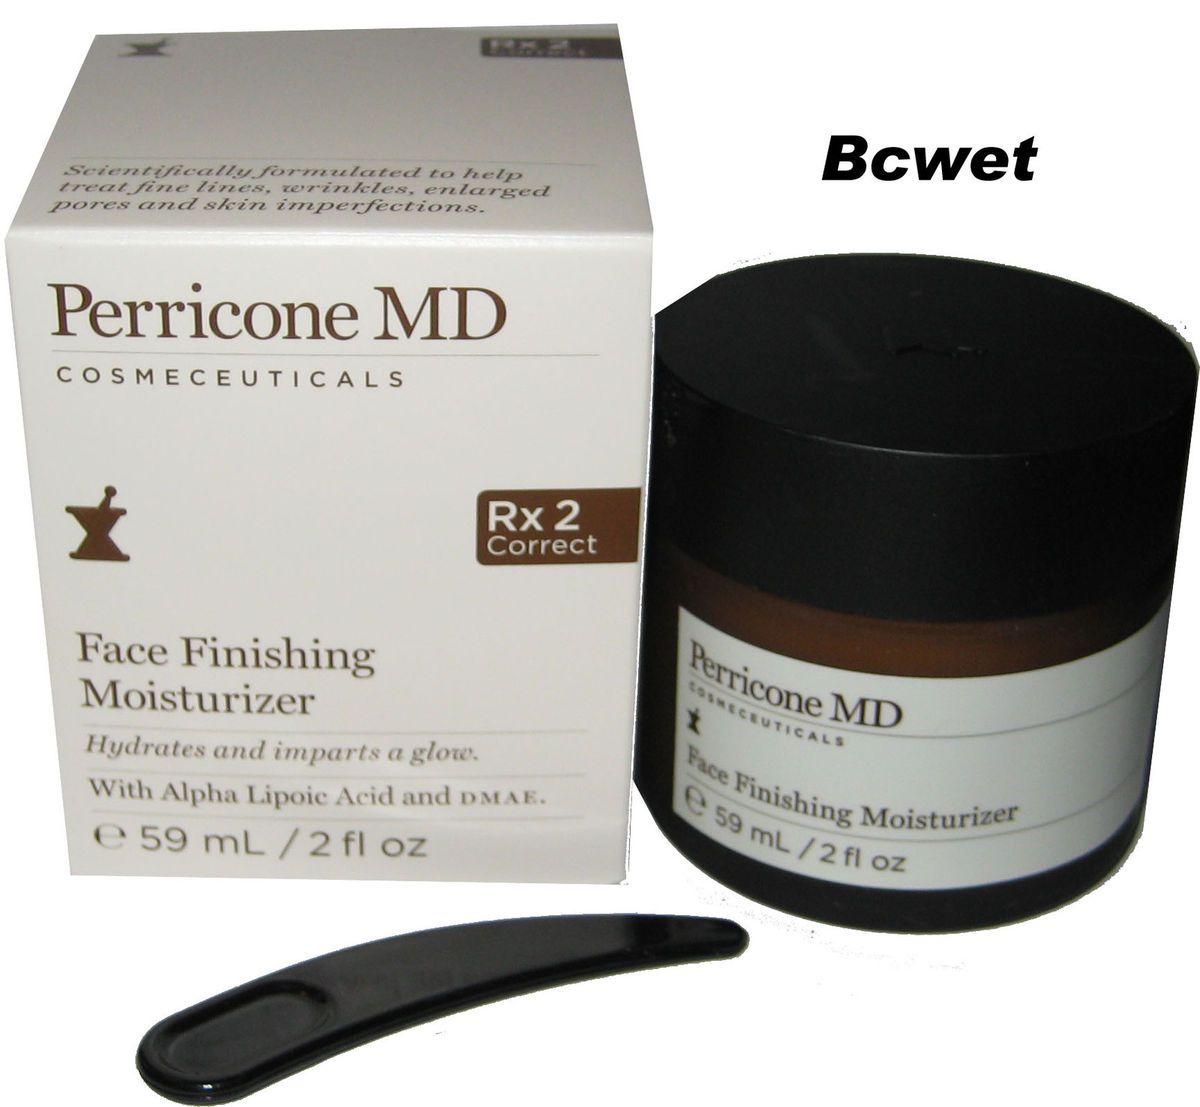 Perricone MD Face Finishing Moisturizer 2 oz New in Box